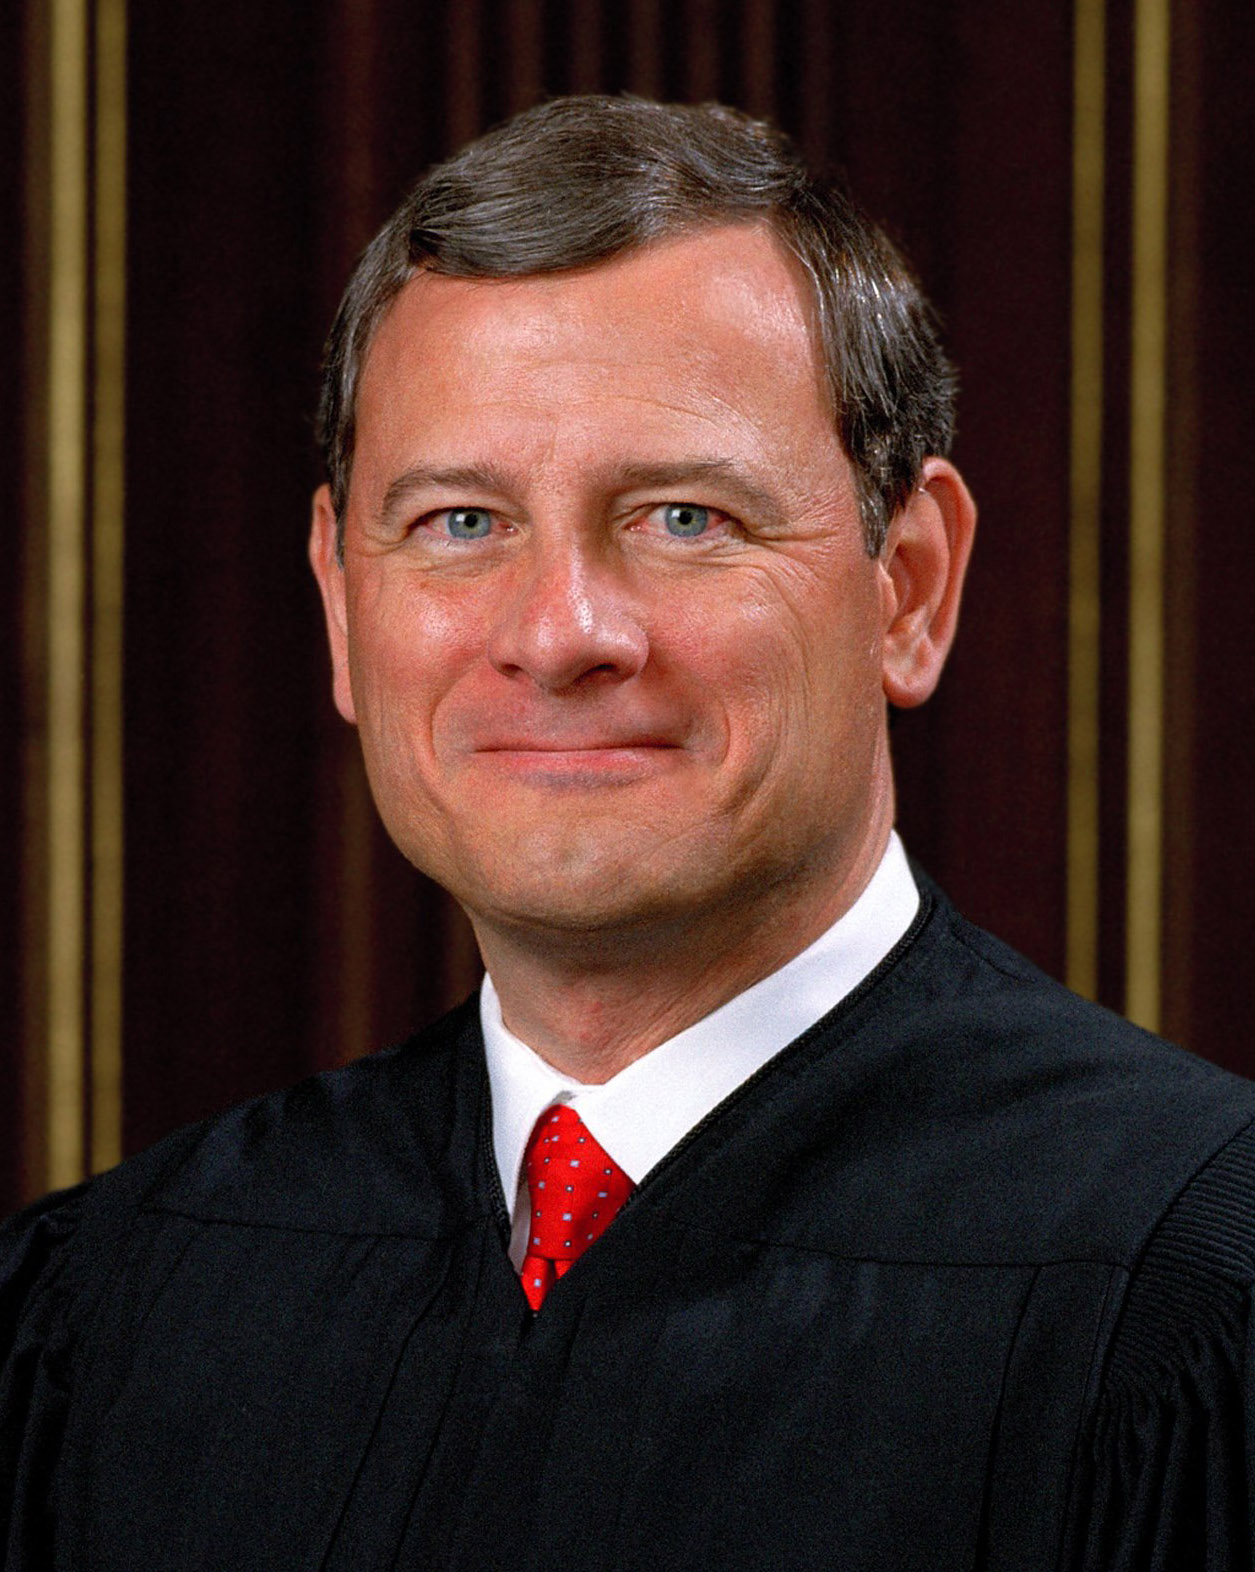 John Roberts - Chief Justice of the United States Supreme Court